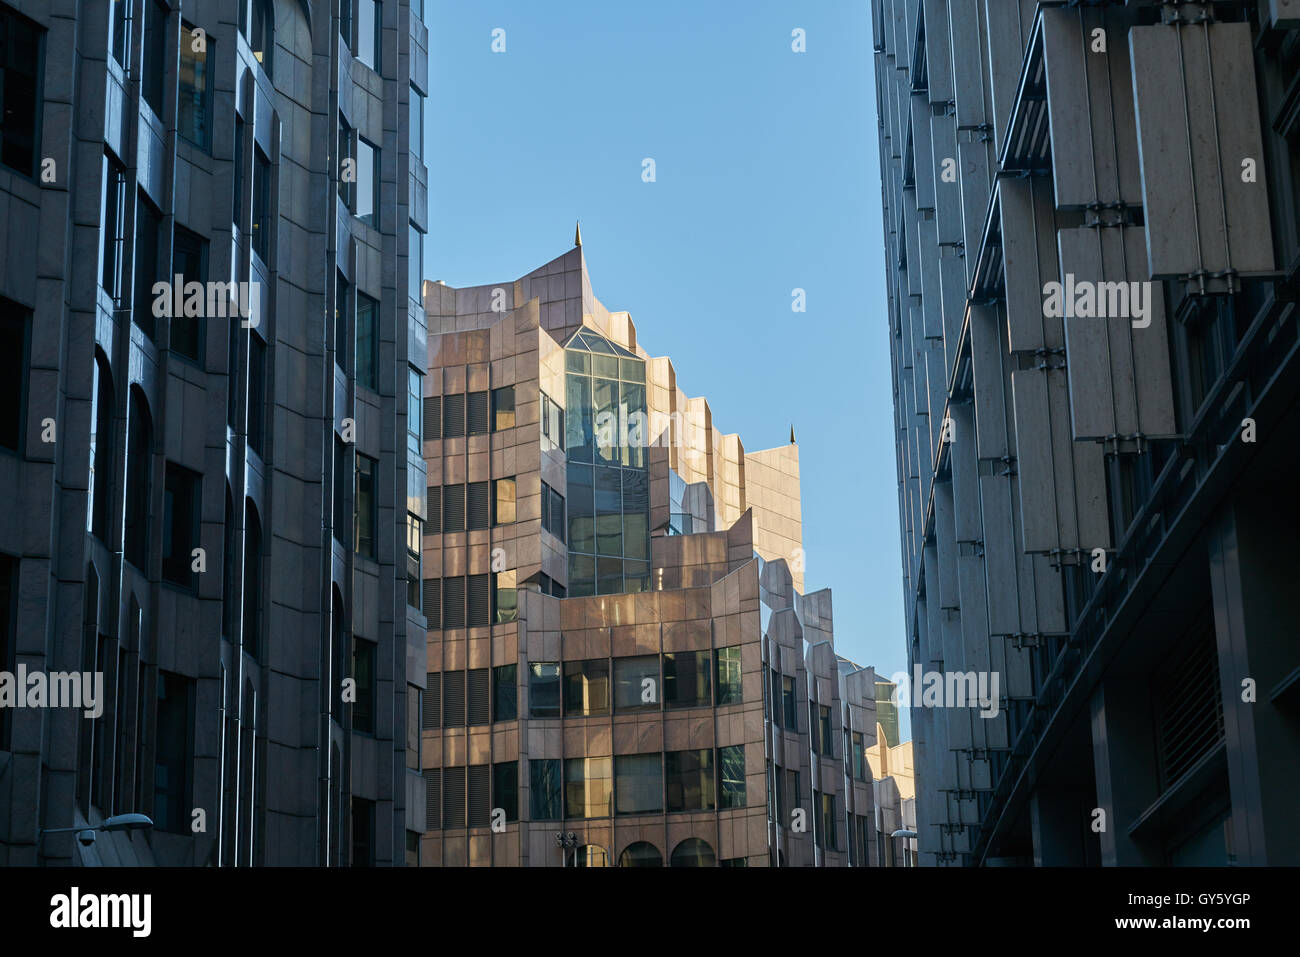 London Financial District, City of London.  Minster court Stock Photo